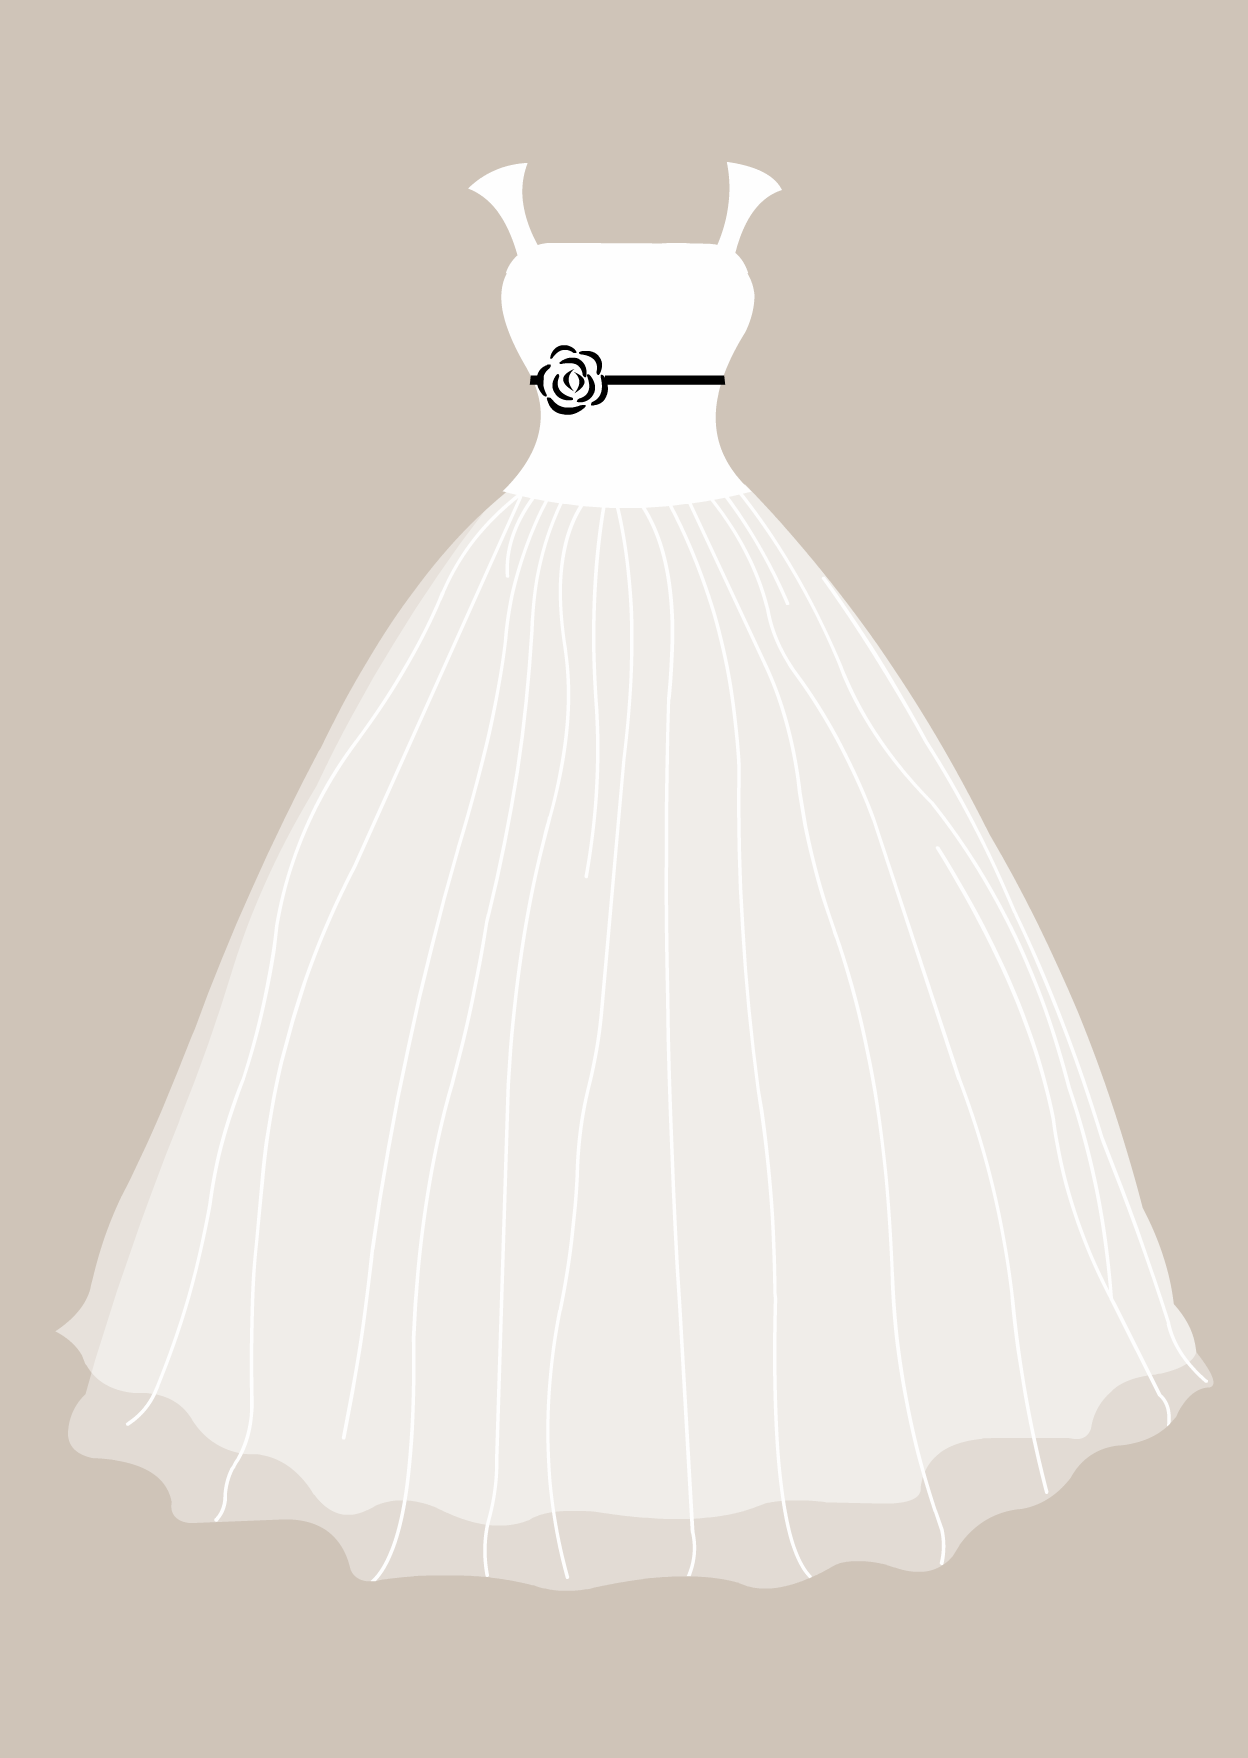 Free Wedding Dress Clipart, Download Free Wedding Dress Clipart png